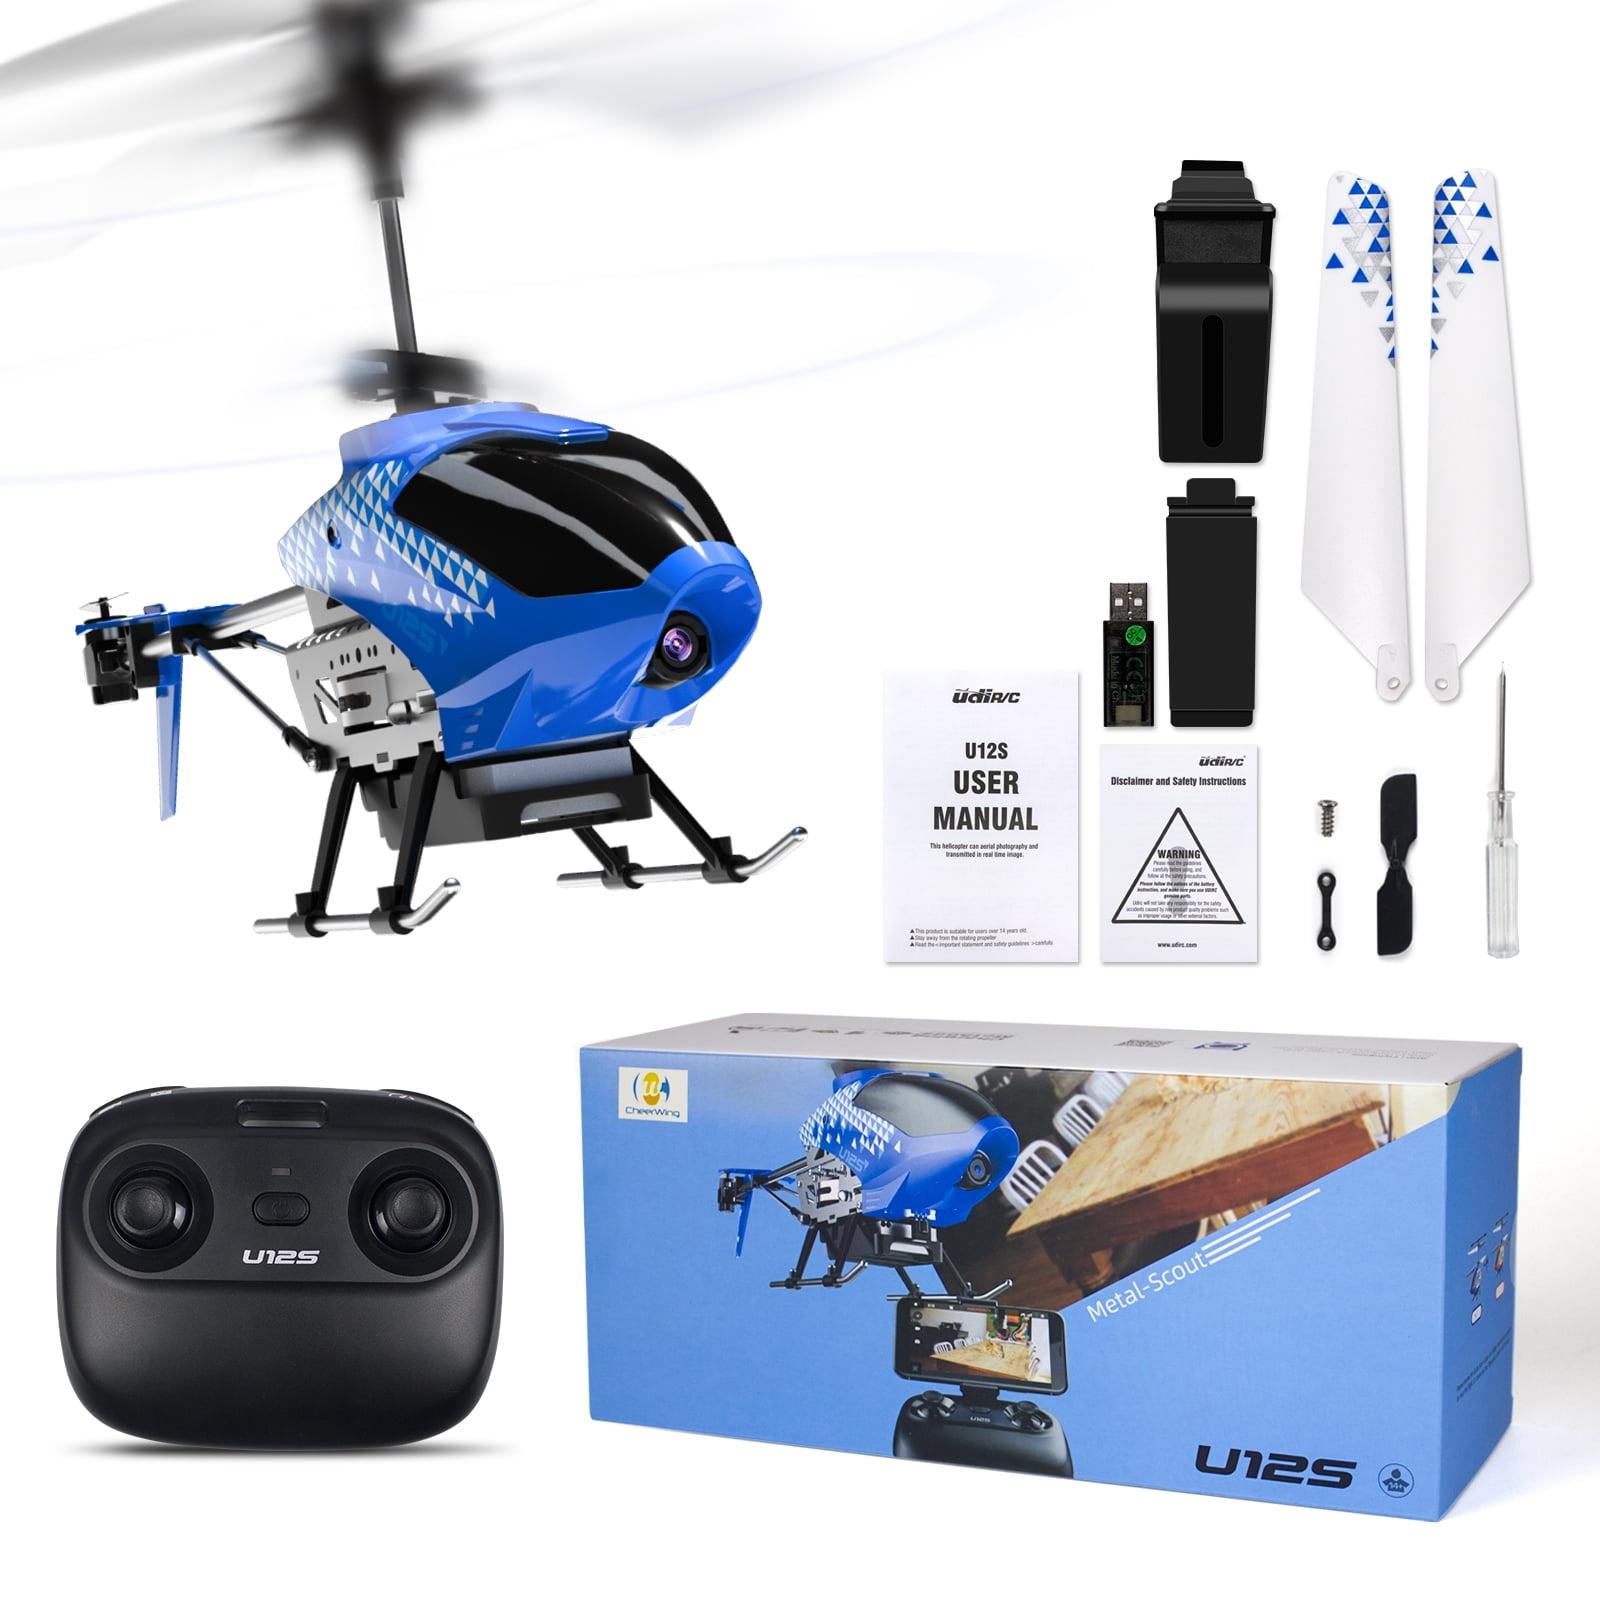 Helicopter Remote Remote Helicopter: Safety Measures for Helicopter Remote Remote Helicopters